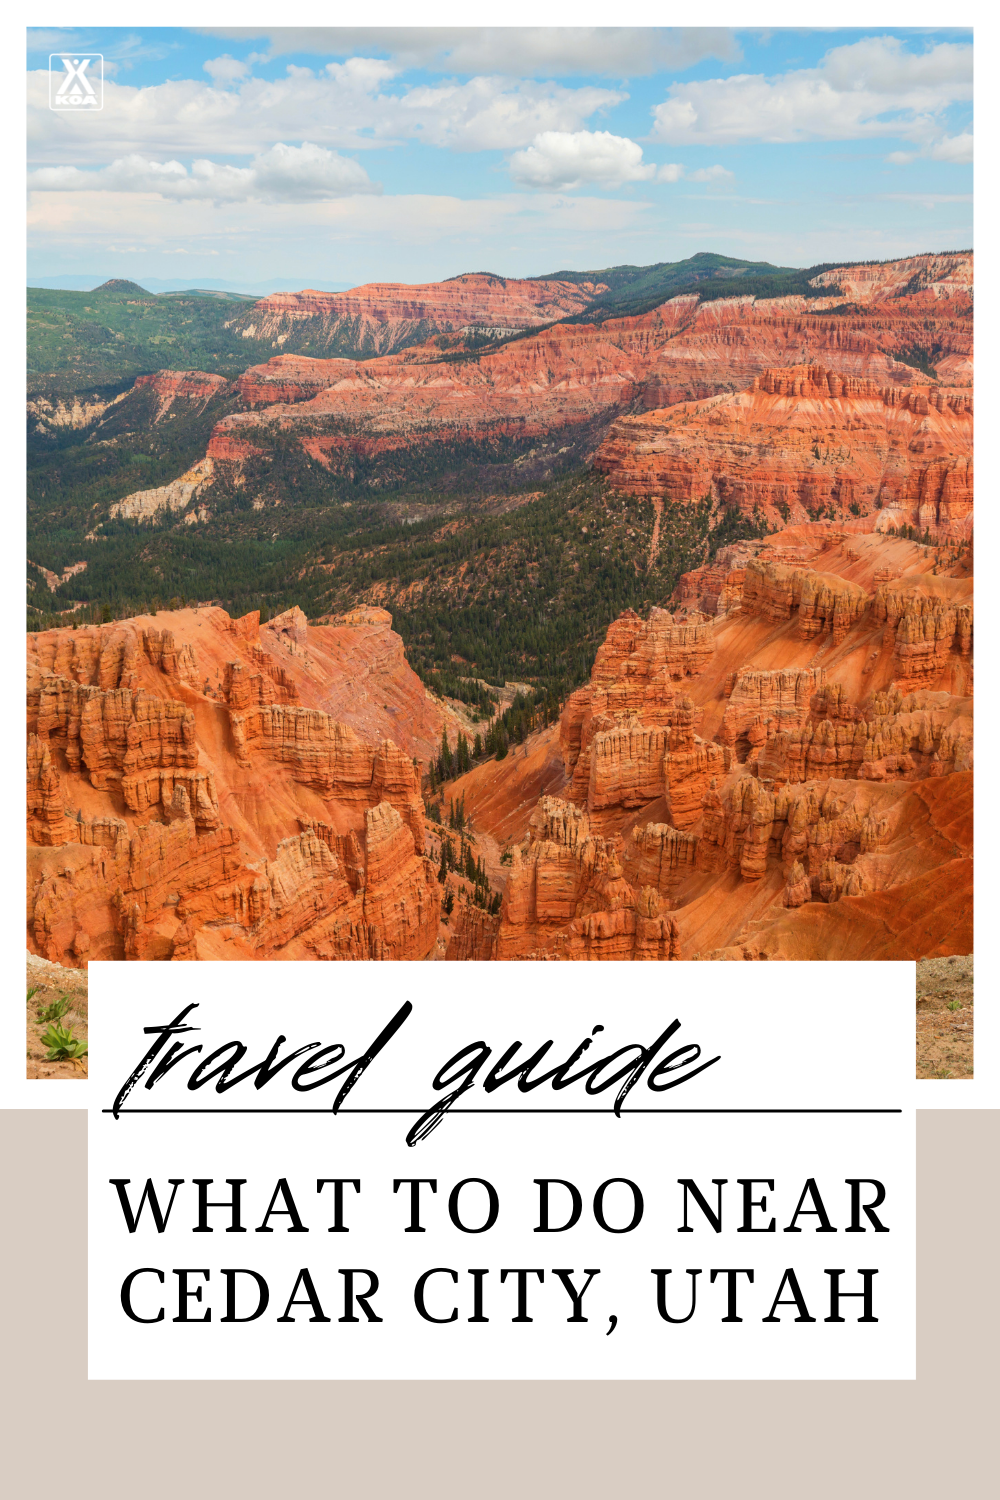 Planning your Cedar city vacation? Check out KOA's best tips on what to see and where to stay to make the most of your trip.